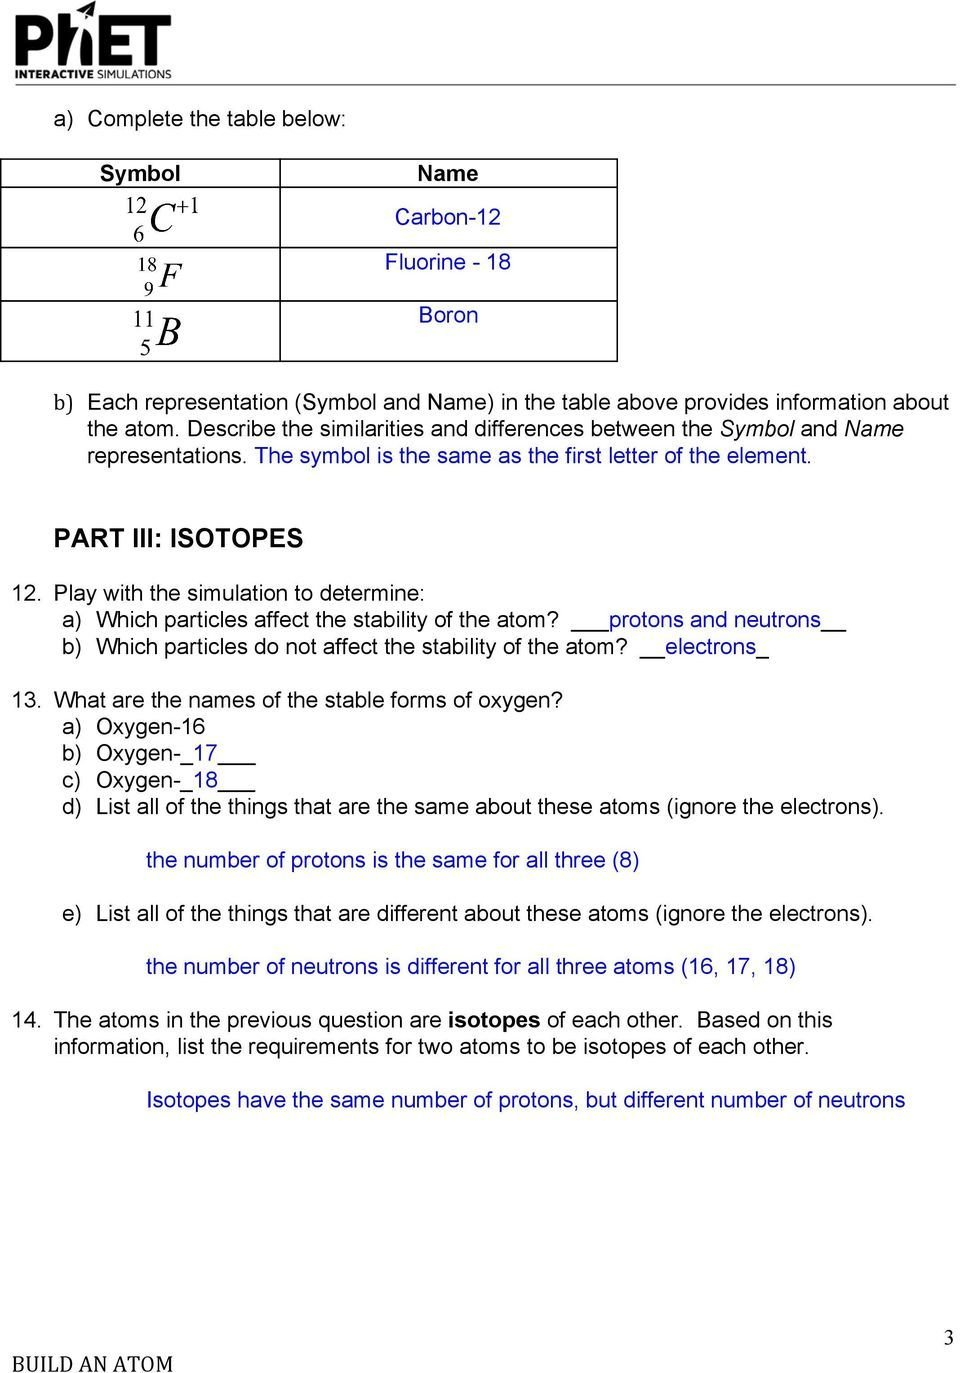 Peters Experiment Worksheet Answer Key  Briefencounters For Peters Experiment Worksheet Answer Key